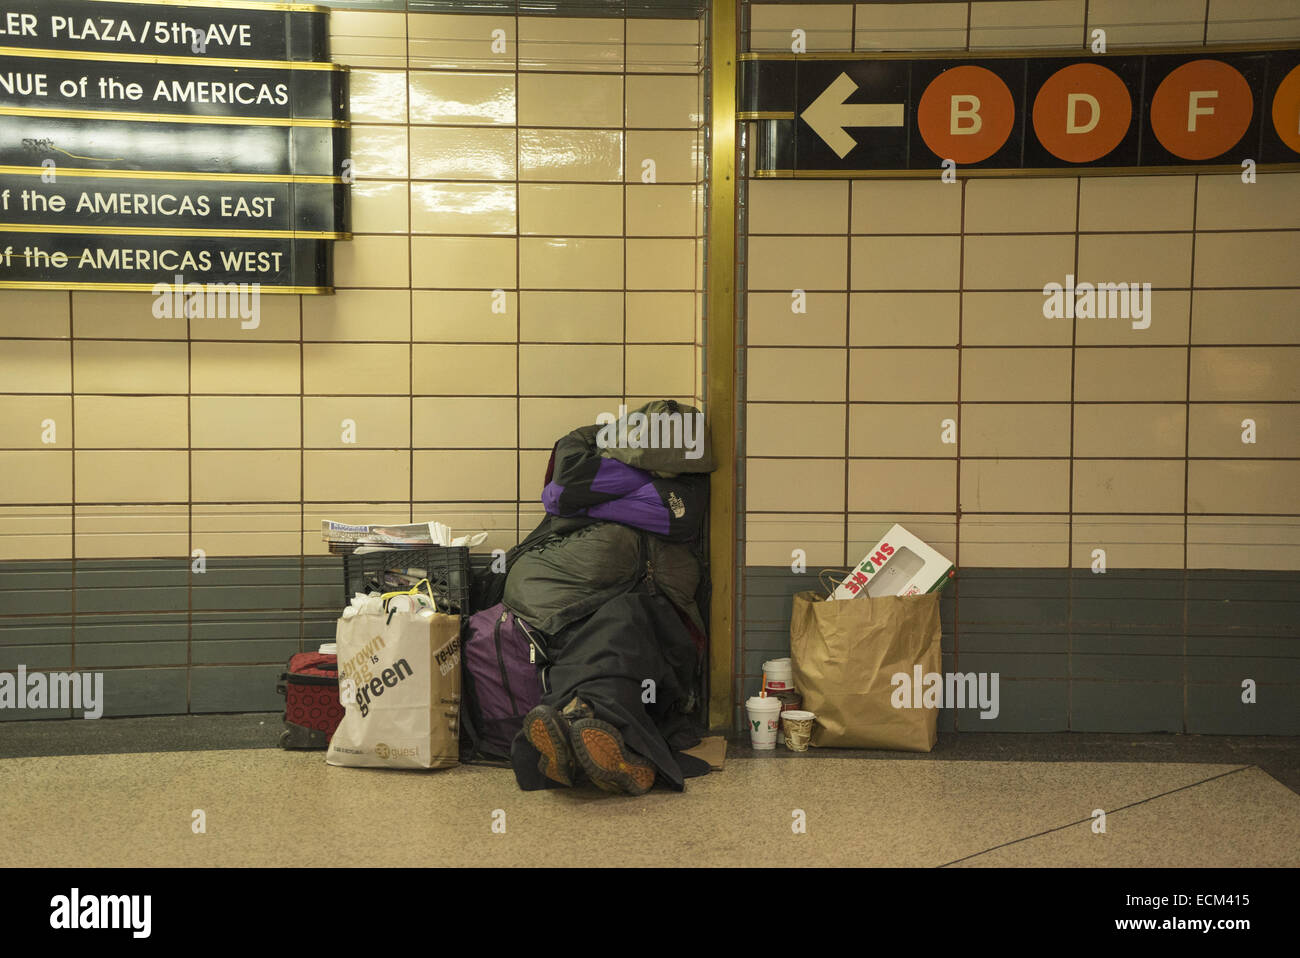 Homeless person takes refuge from the cold in an underground subway station at 34th St. in NYC. Stock Photo